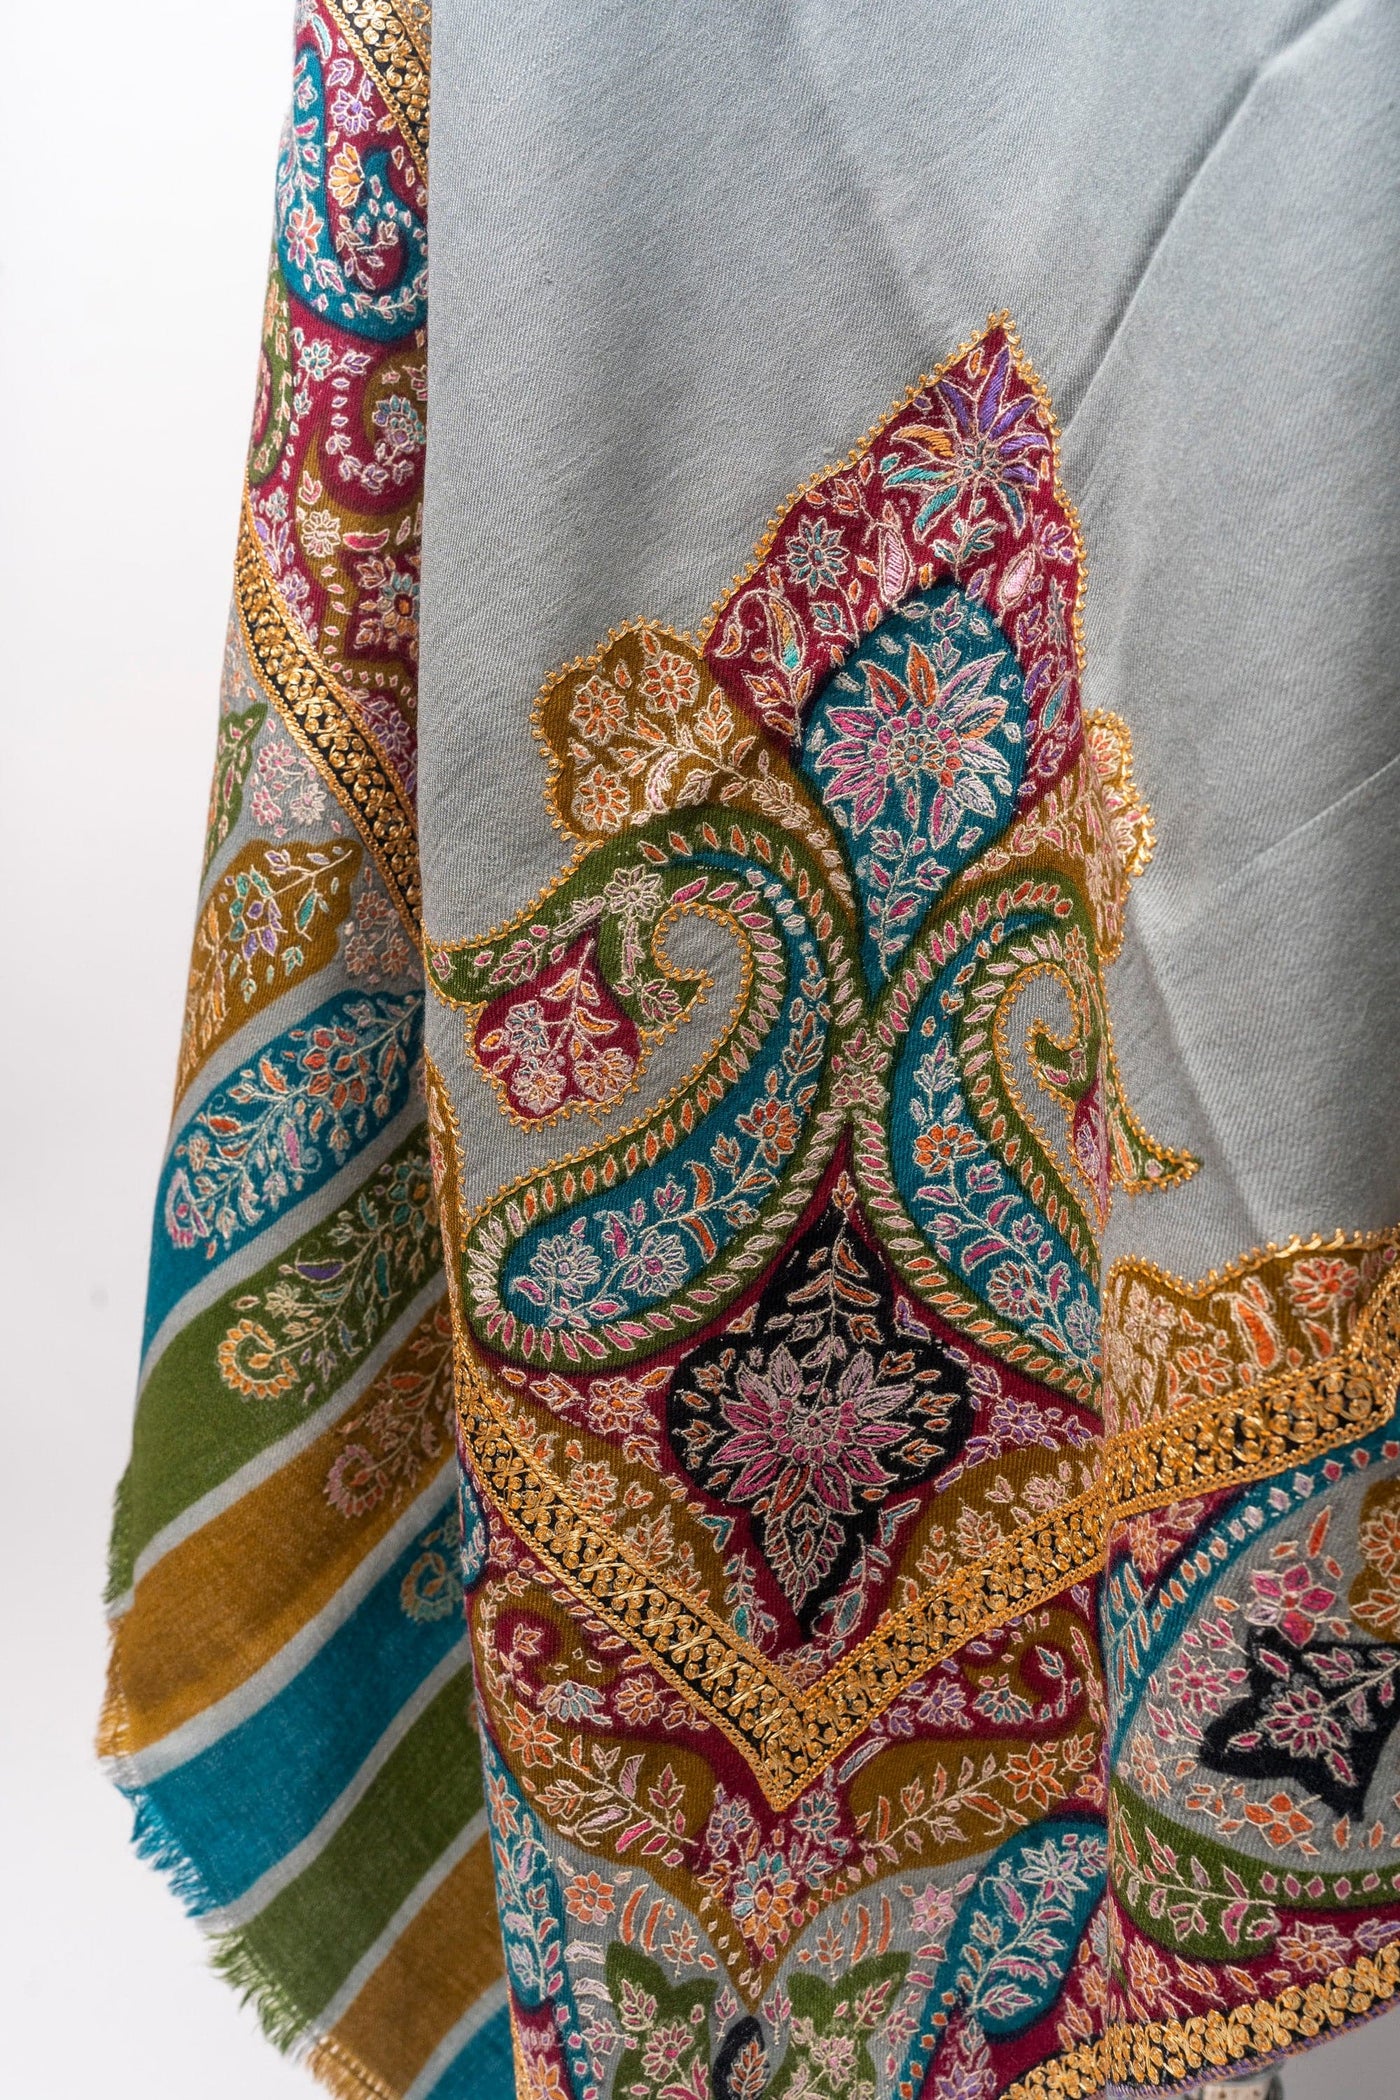 Misty Dawn Tilla Grandeur - Hand Embroidered Pashmina Shawl with Tilla and Sozni Embroidery